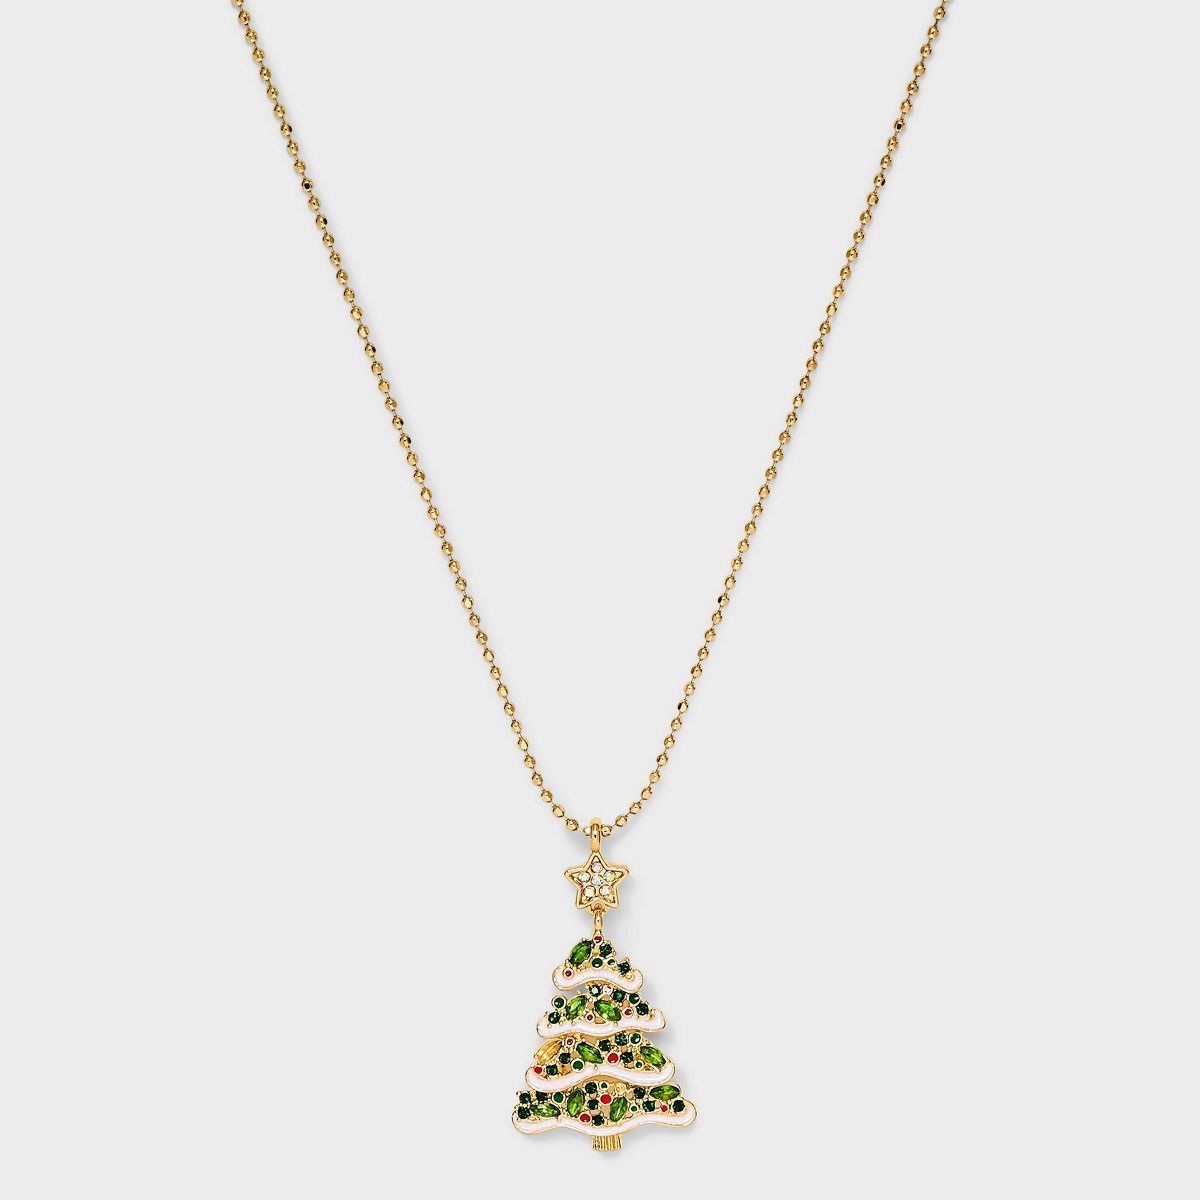 SUGARFIX by BaubleBar "Under the Tree" Pendant Necklace - Green | Target